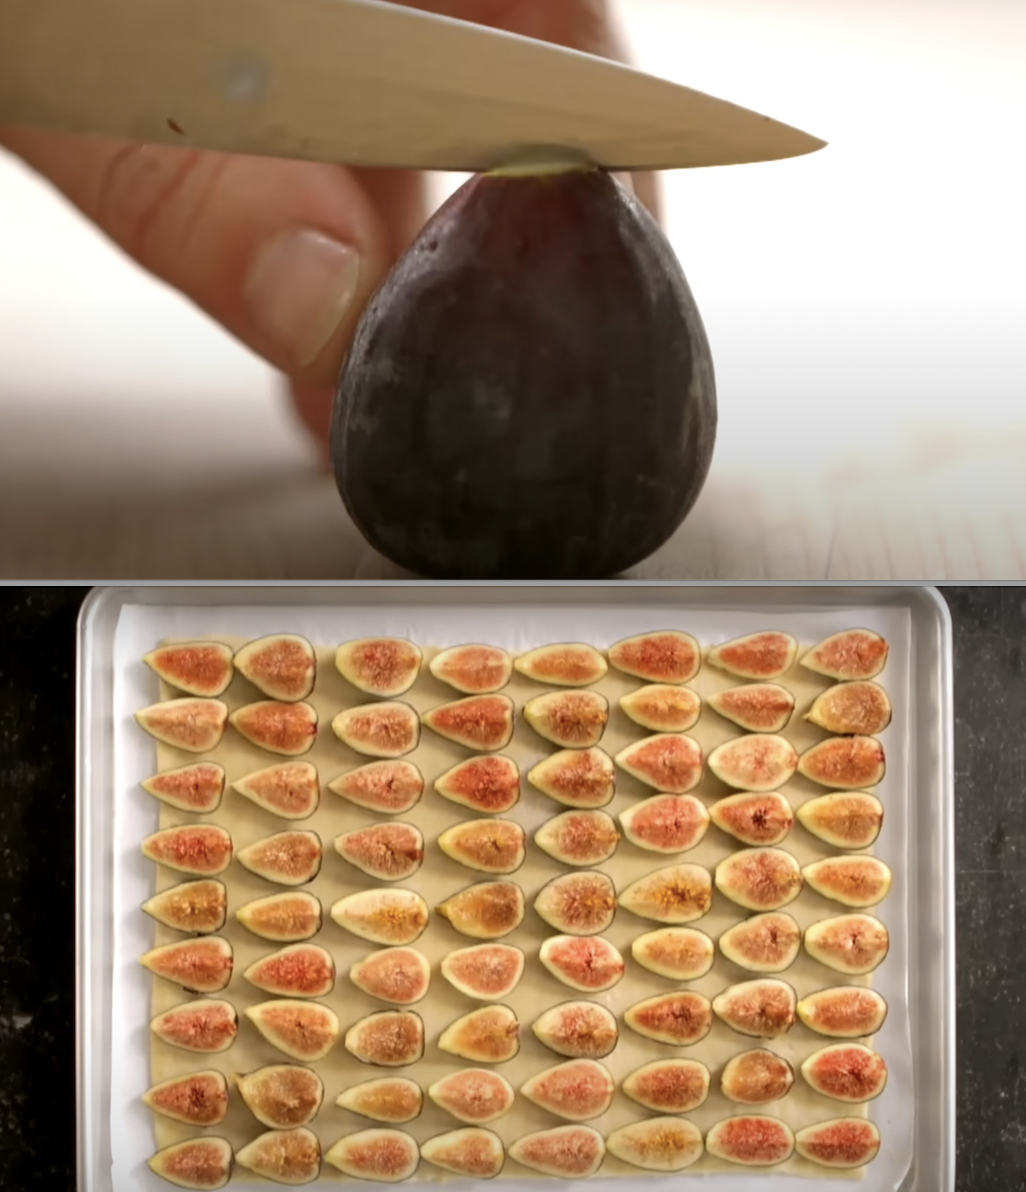 Ina Garten cutting figs and placing them on a tray